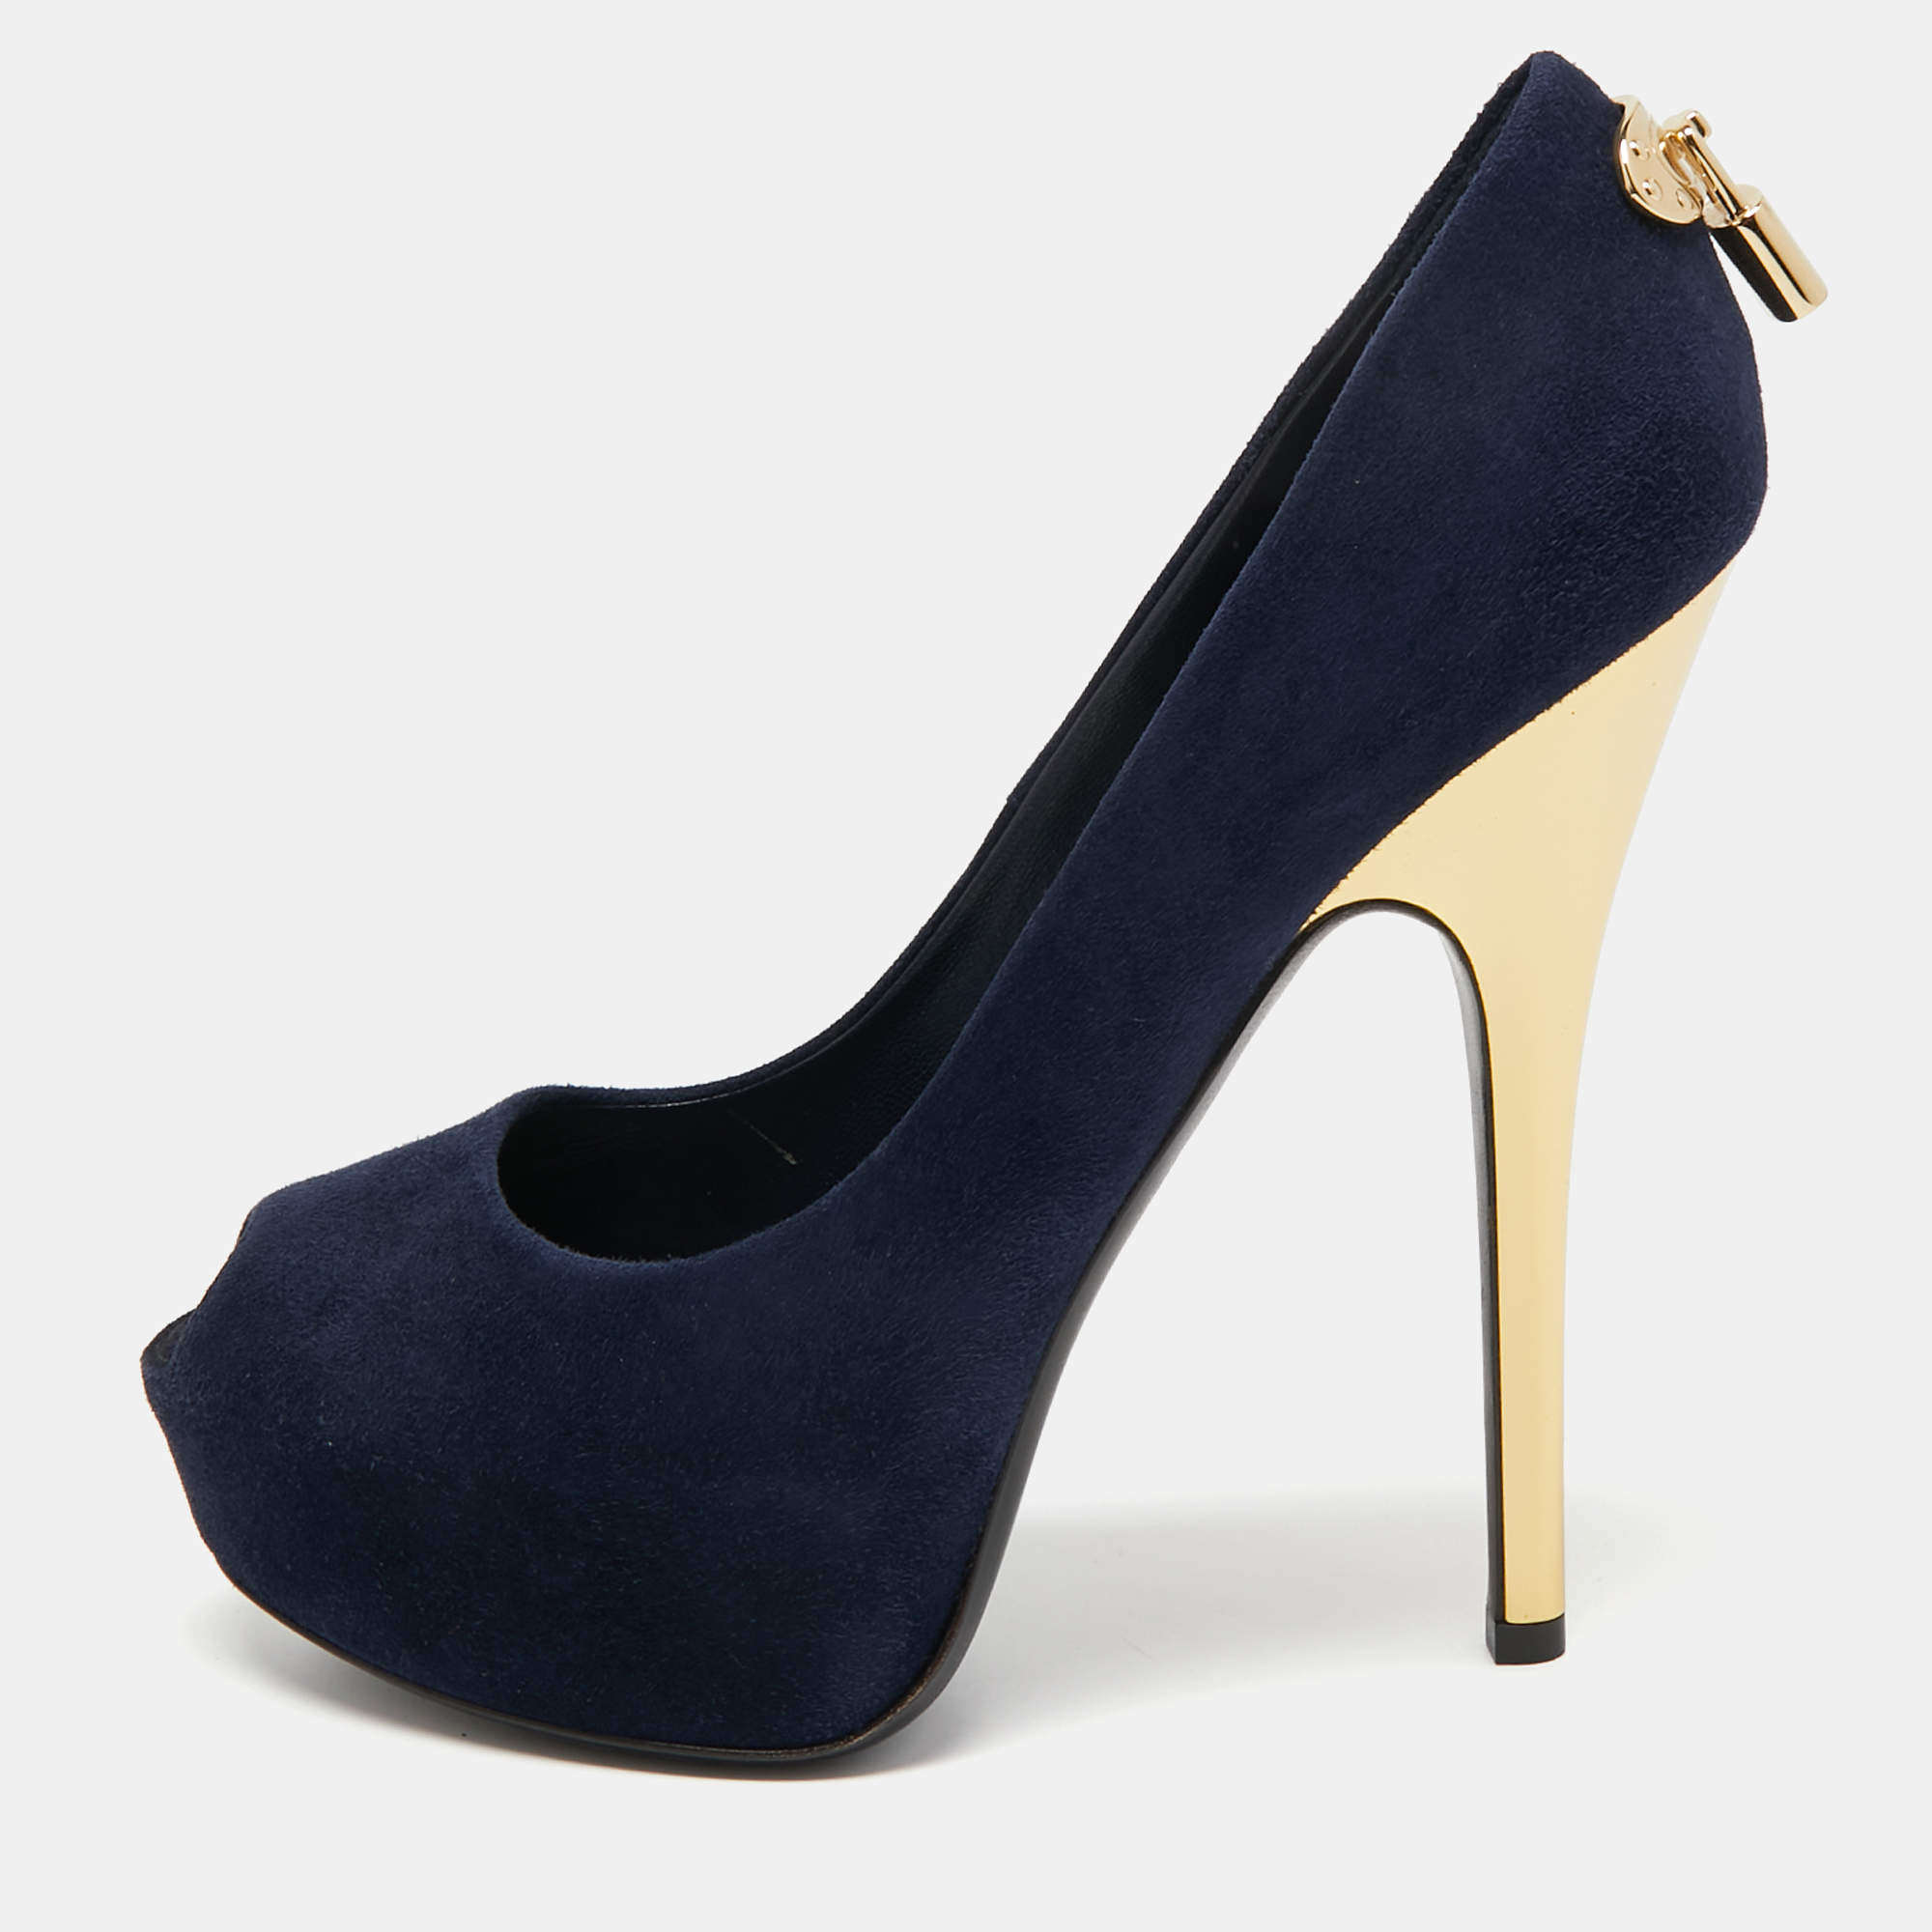 Louis Vuitton Blue Suede Oh Really! Pumps Size 38.5